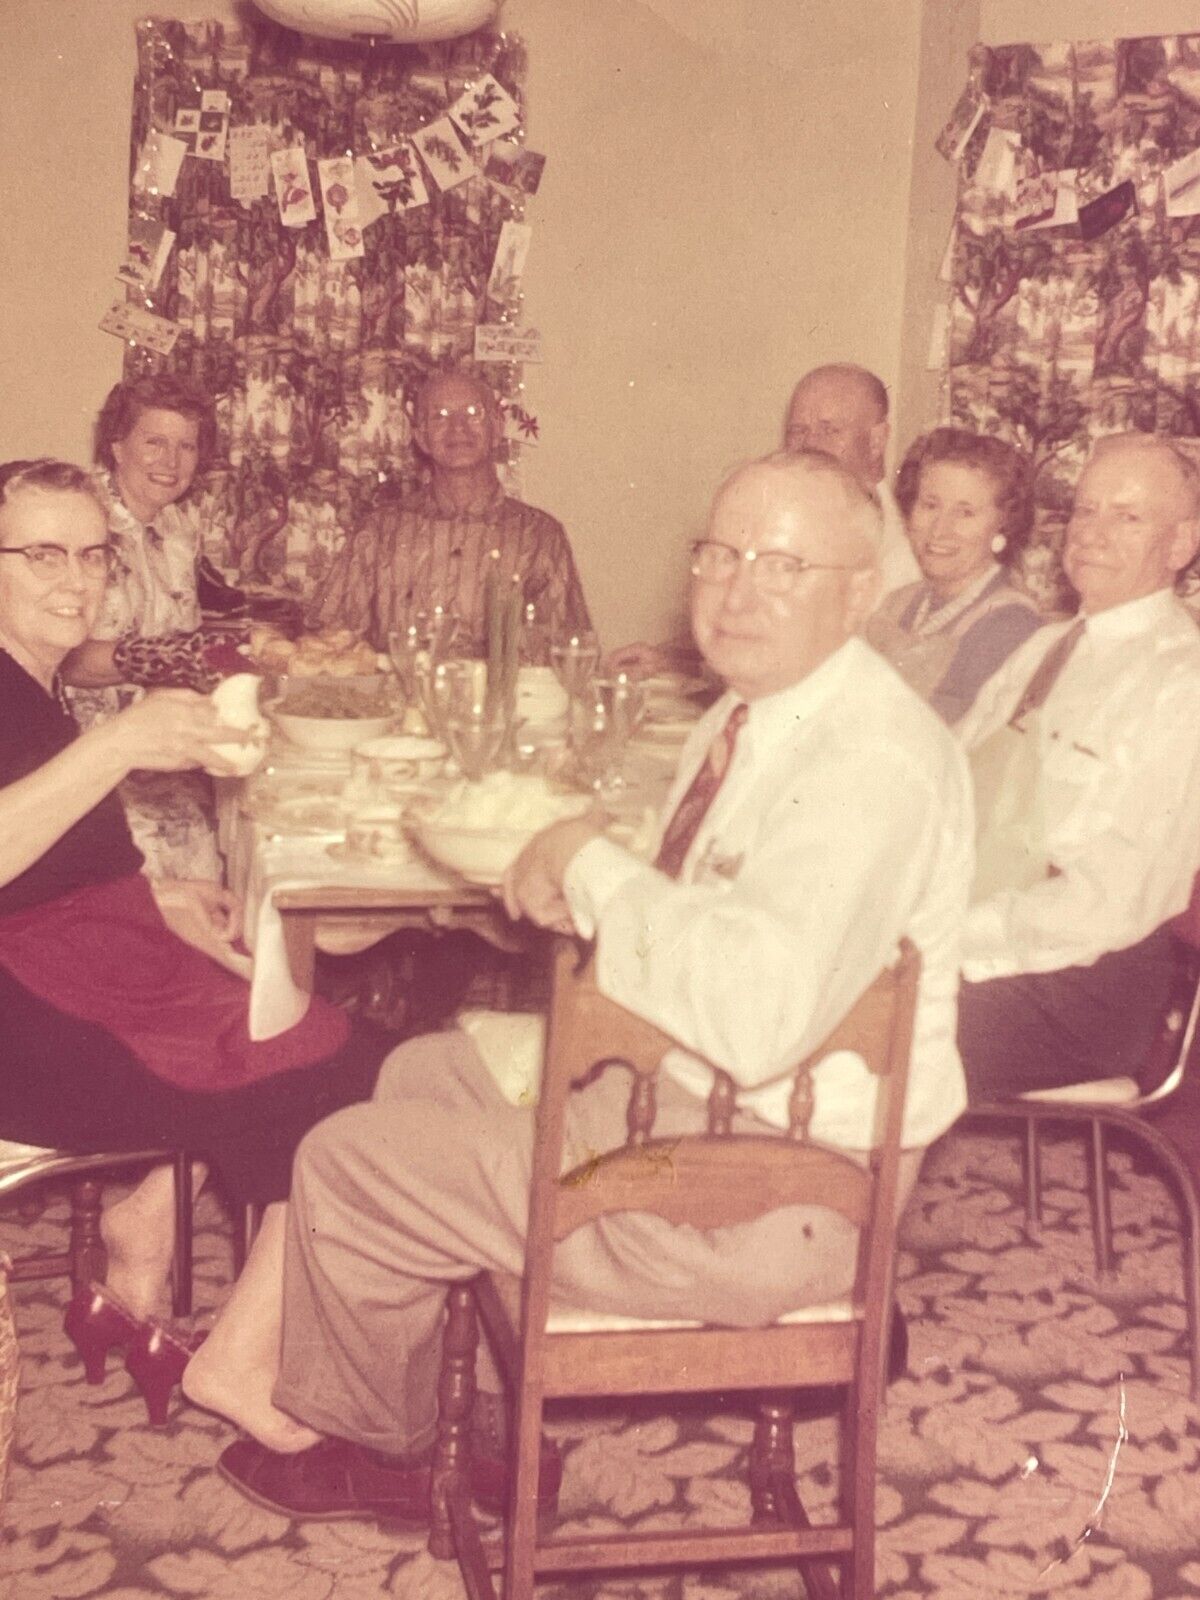 GE Photograph Cute 1959 Cute Group Old Older Family Holidays Dinner 